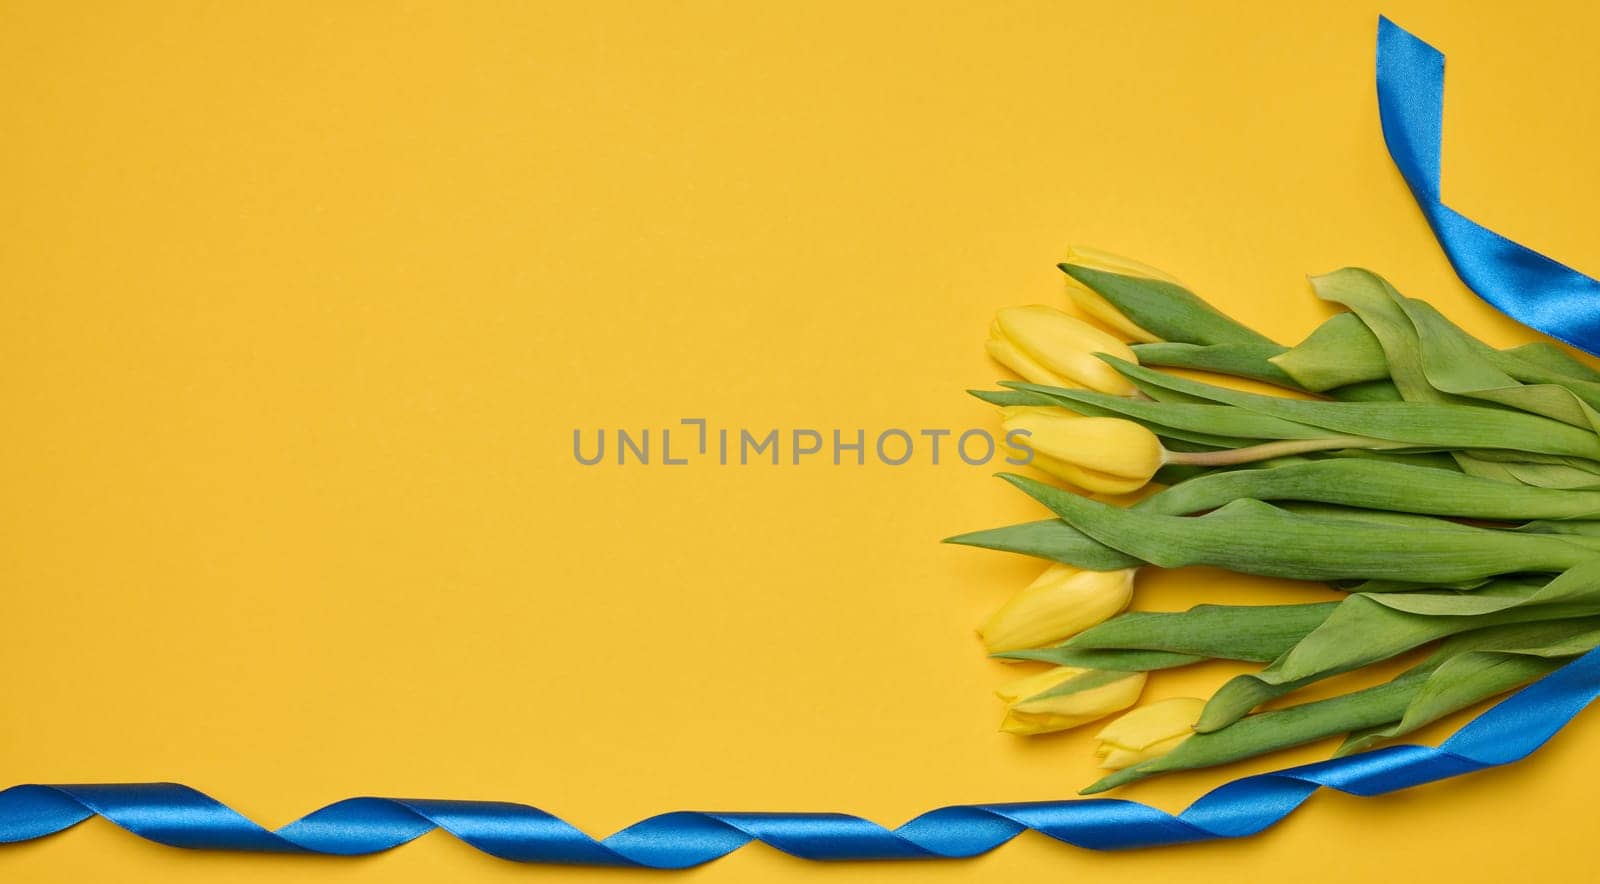 Bouquet of blooming yellow tulips with green leaves on a yellow background, copy space